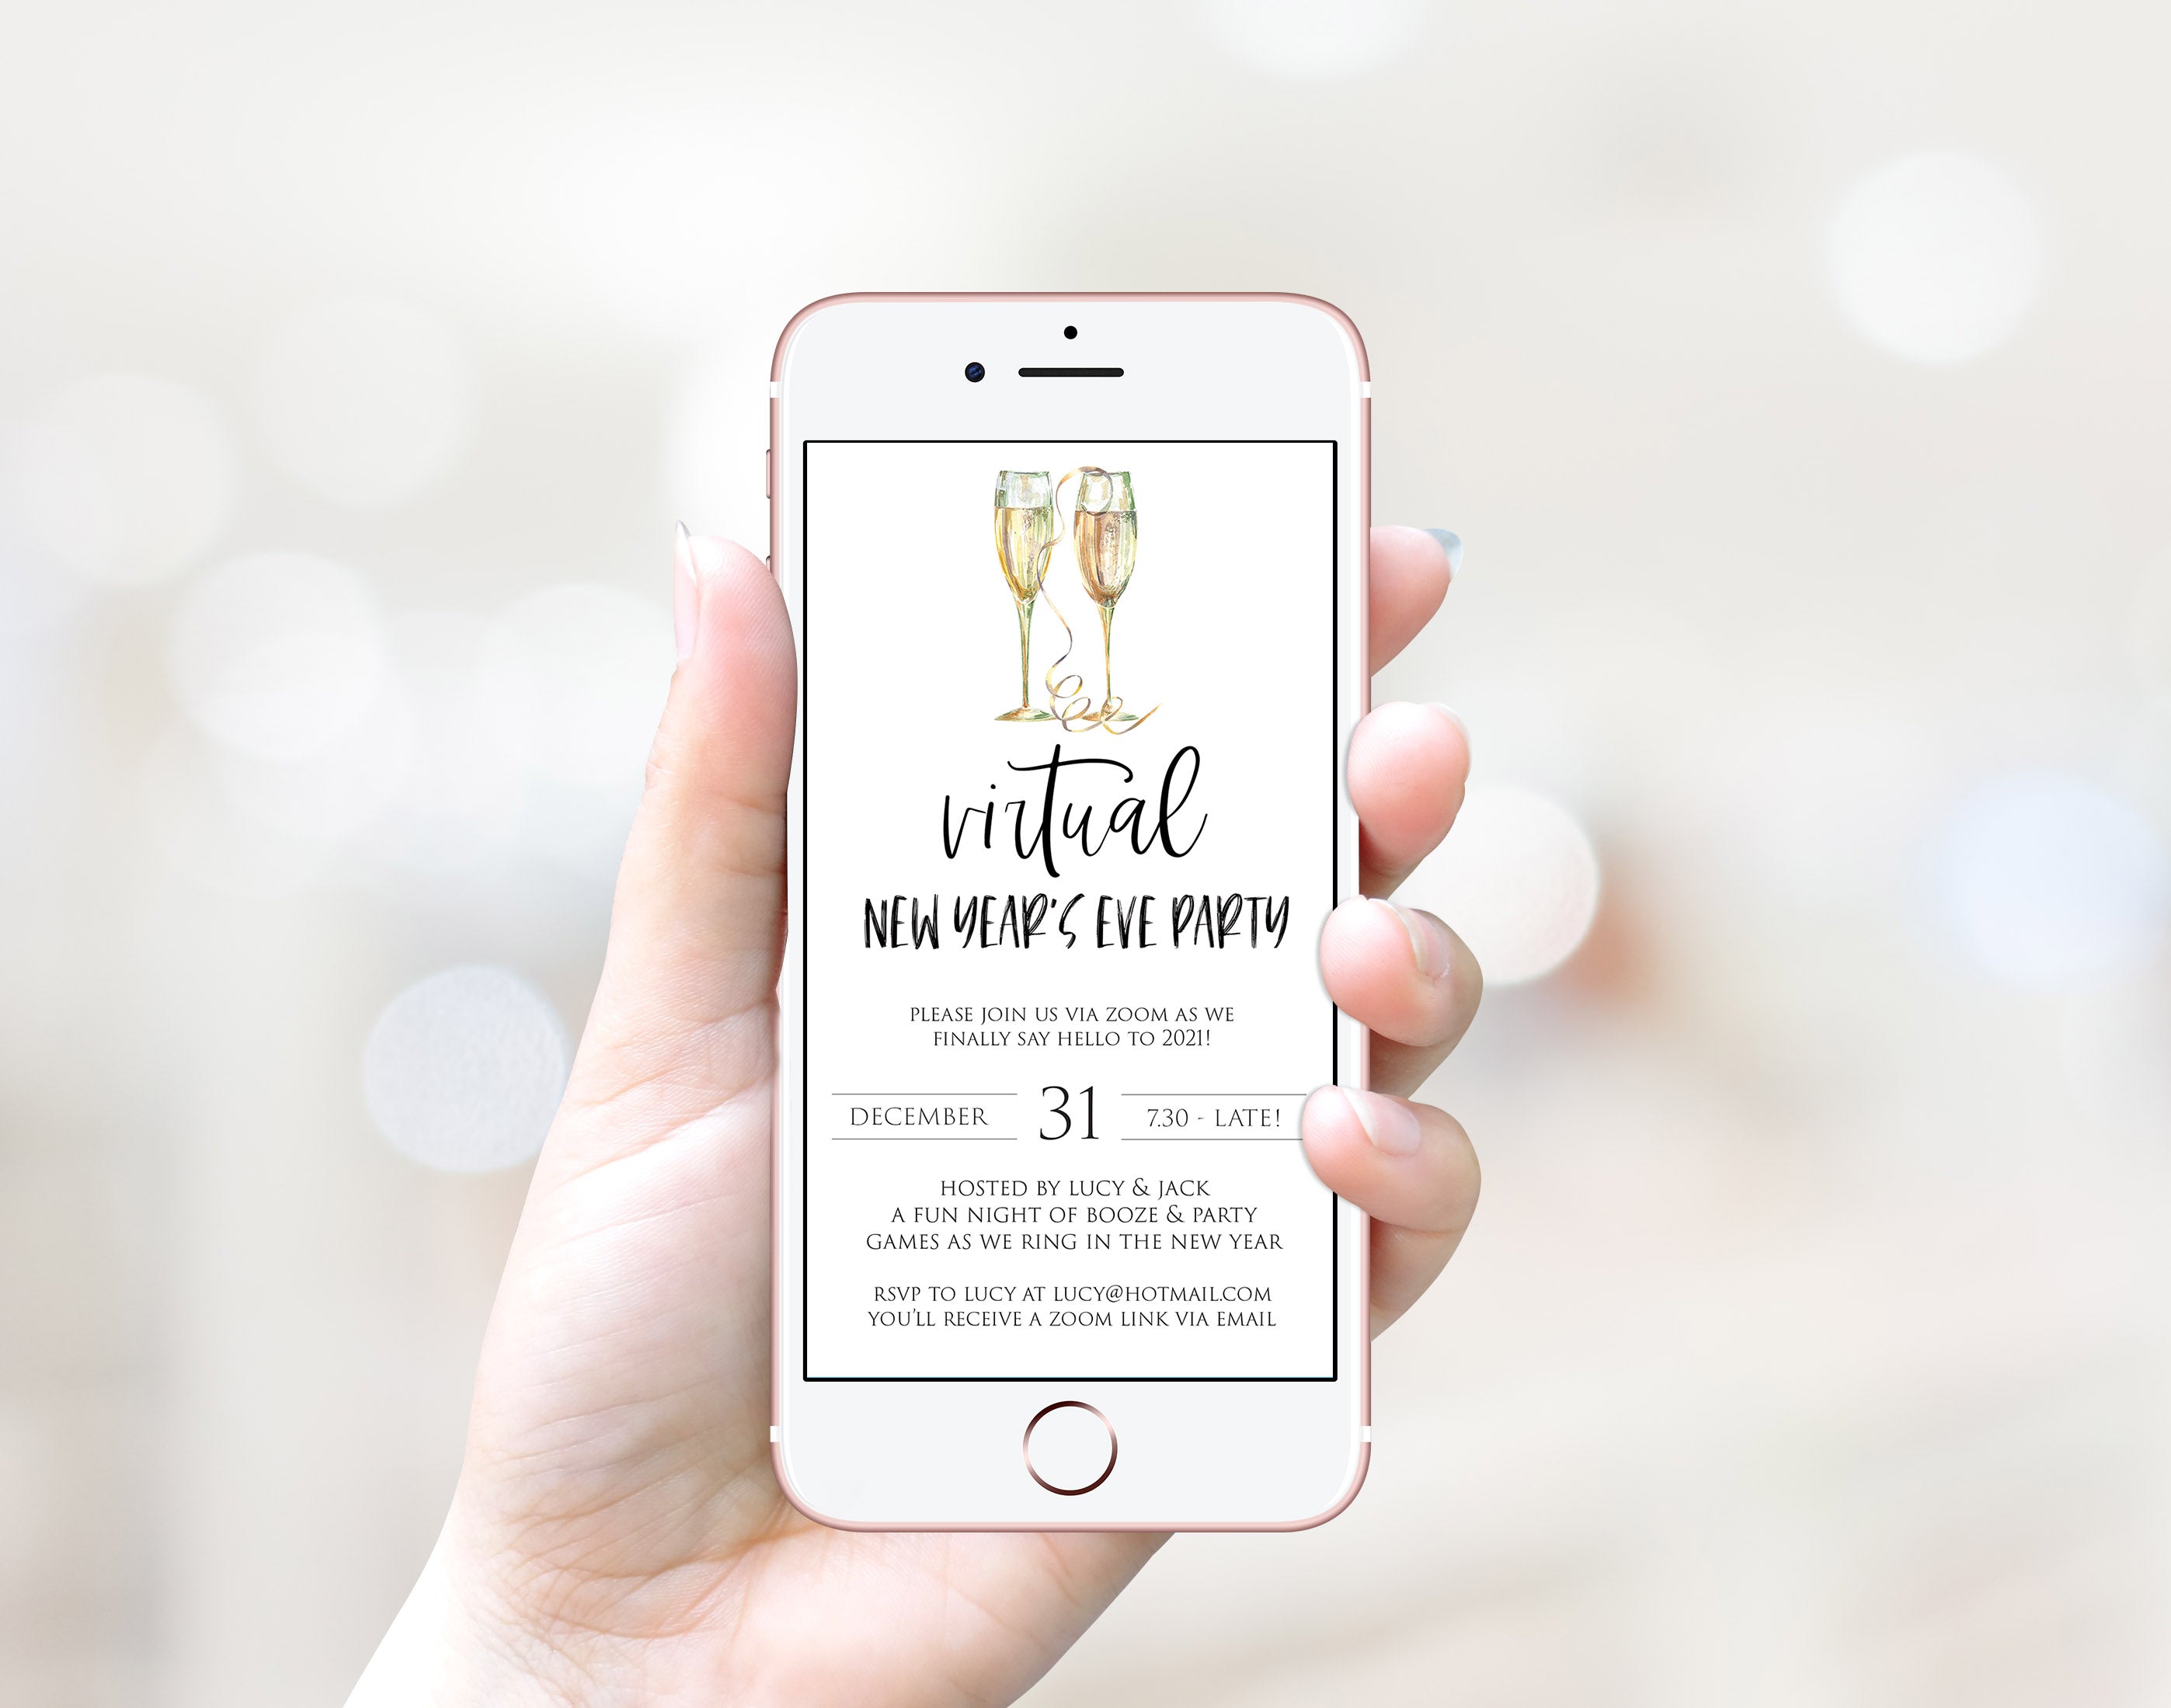 virtual new years eve party, new years eve party invitation, new years eve party ideas, party invitations, editable party invitations, gold new years eve invitation